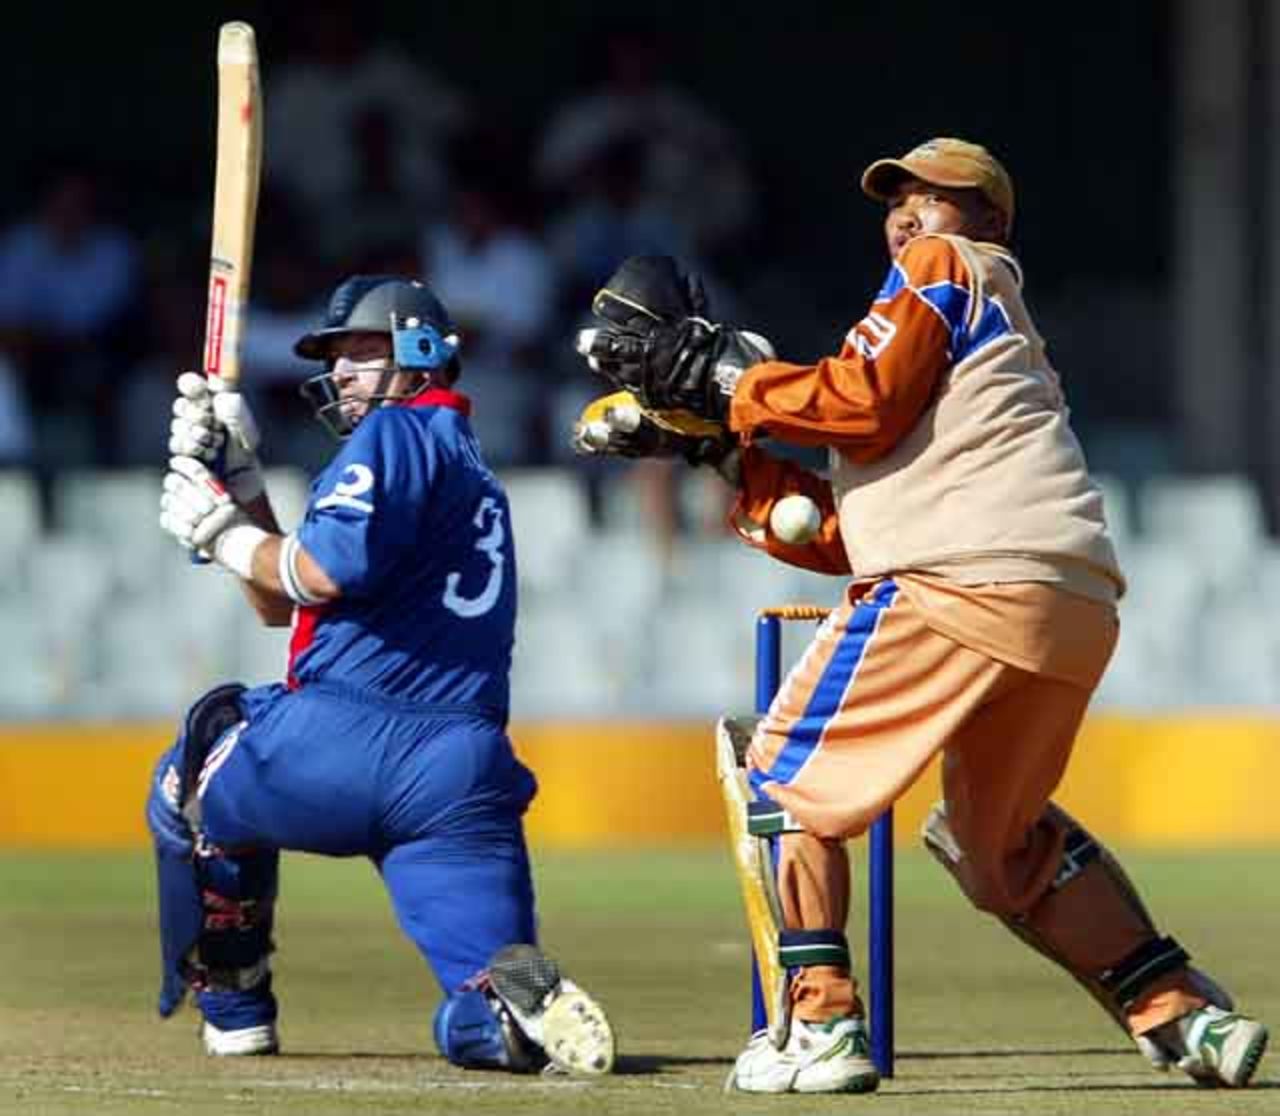 England's skipper Nasser Hussain sweeps behind as Border Bears' wicket keeper Abongile Sodumo, World Cup warm up match at Buffalo Park in East London, South Africa, February 6, 2003.